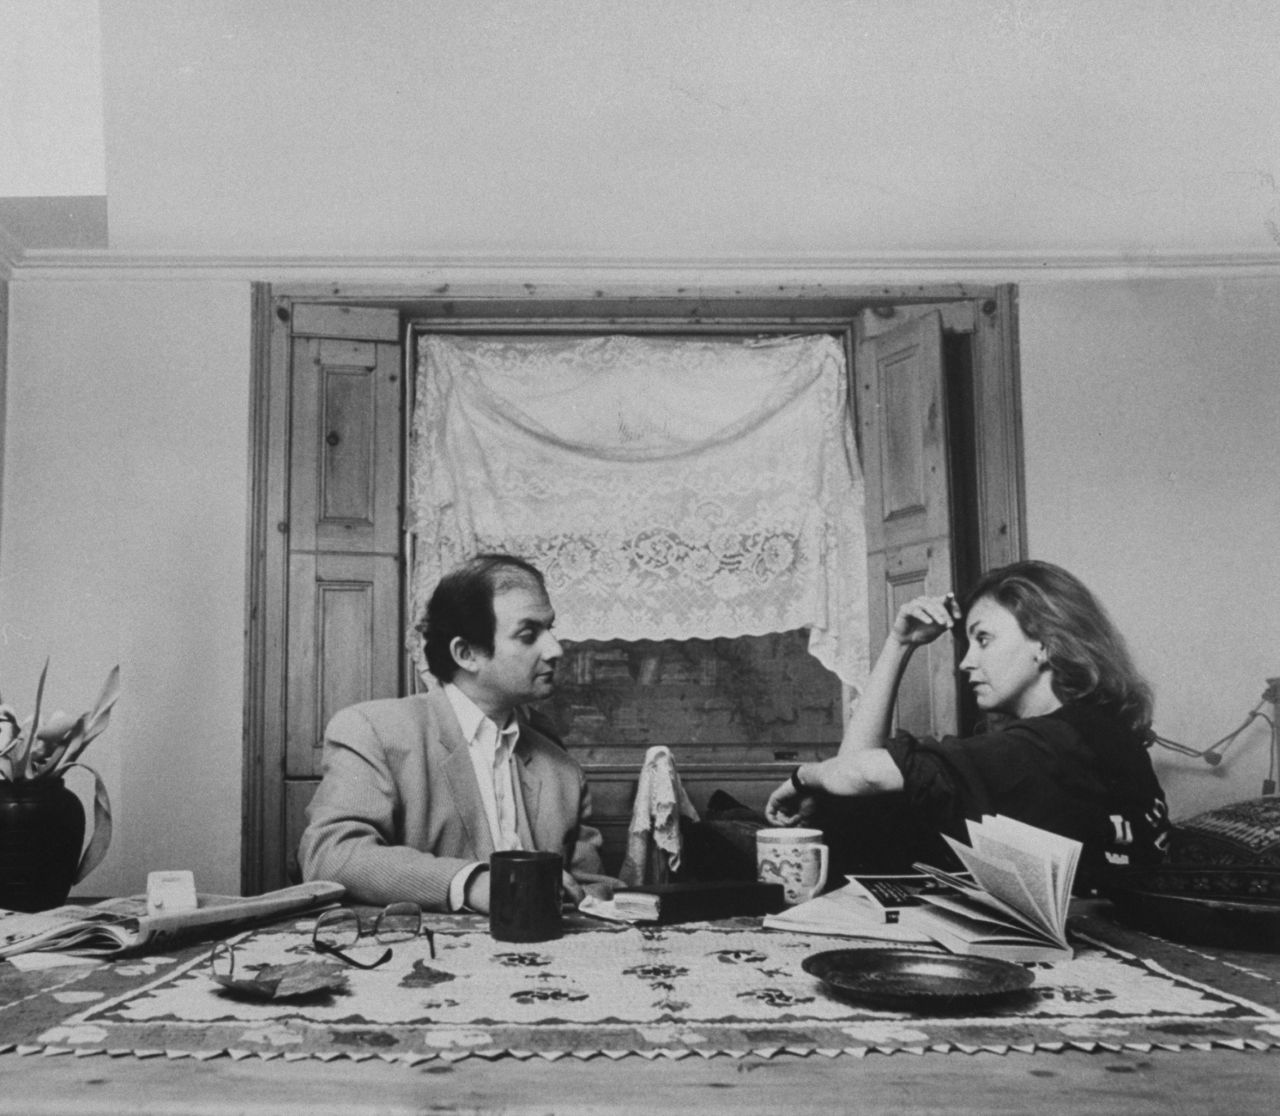 February 14 marks 25 years since Iran's Ayatollah Khomeini called for the death of author Salman Rushdie over his novel "The Satanic Verses." Here Rusdhie and wife Marianne Wiggins talk after going into hiding in February 1989. 